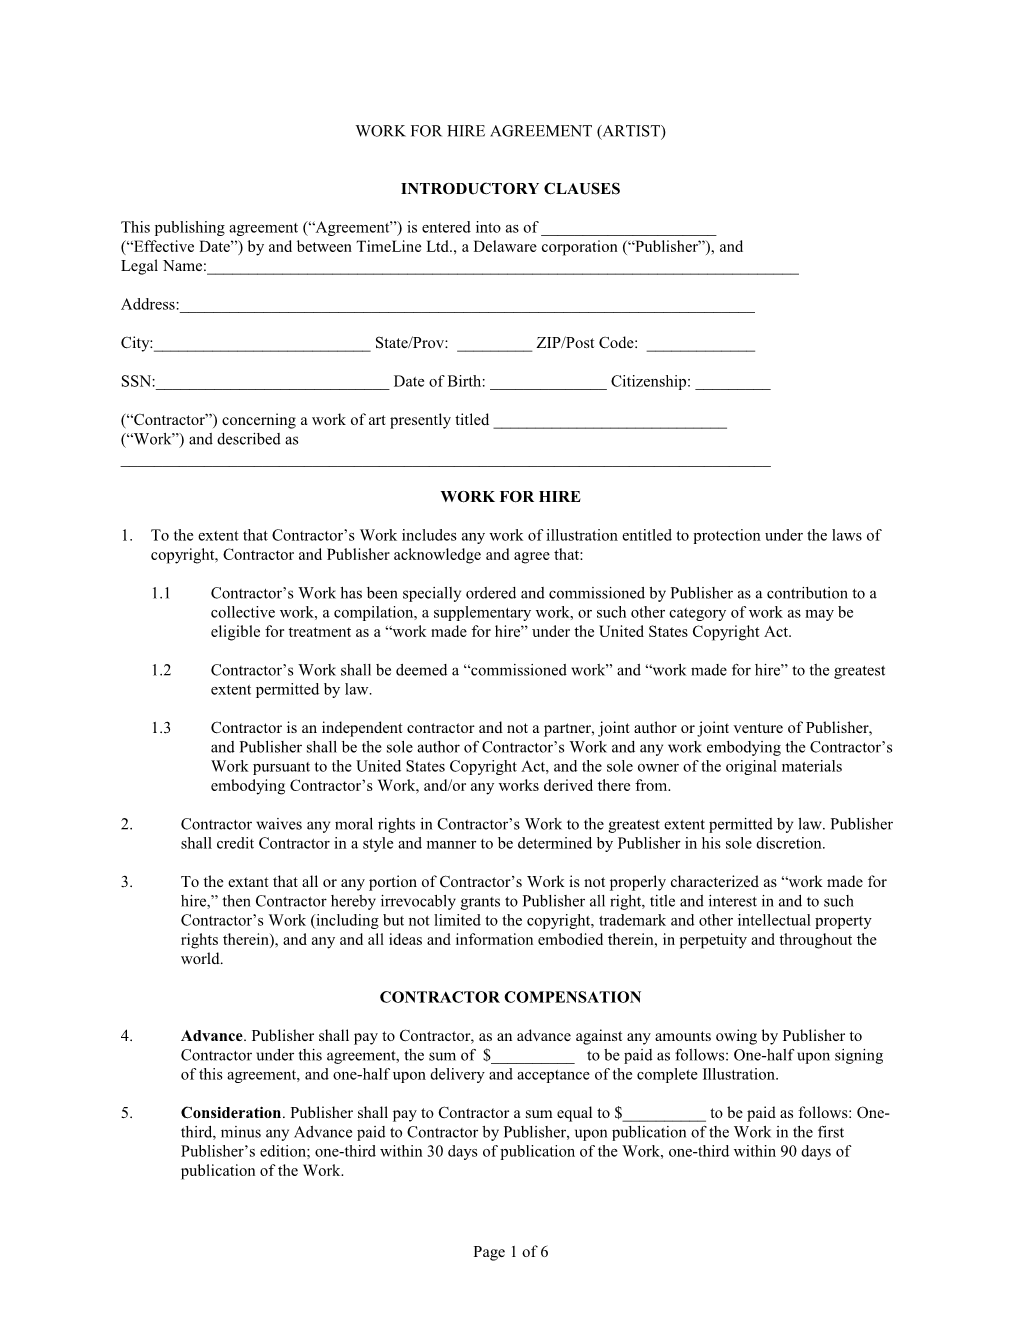 Artist Work for Hire Agreement Page 1 of 5 Form WFHA010406